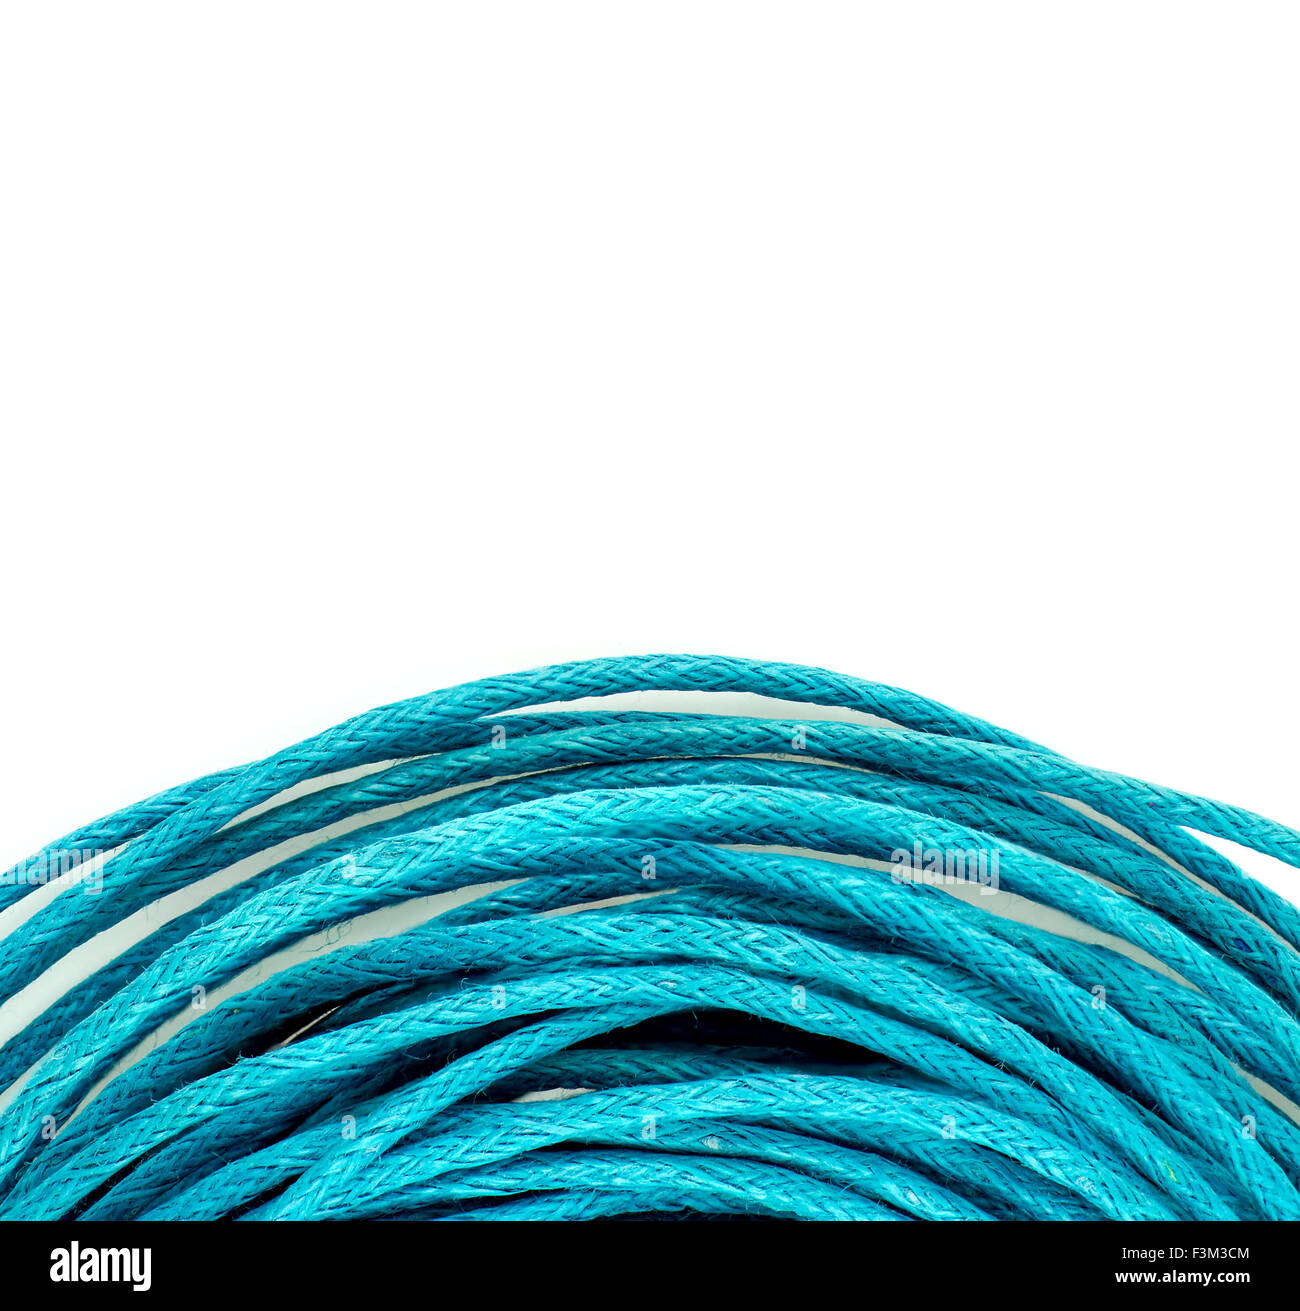 Spiral bright blue string rope background texture Stock Photo